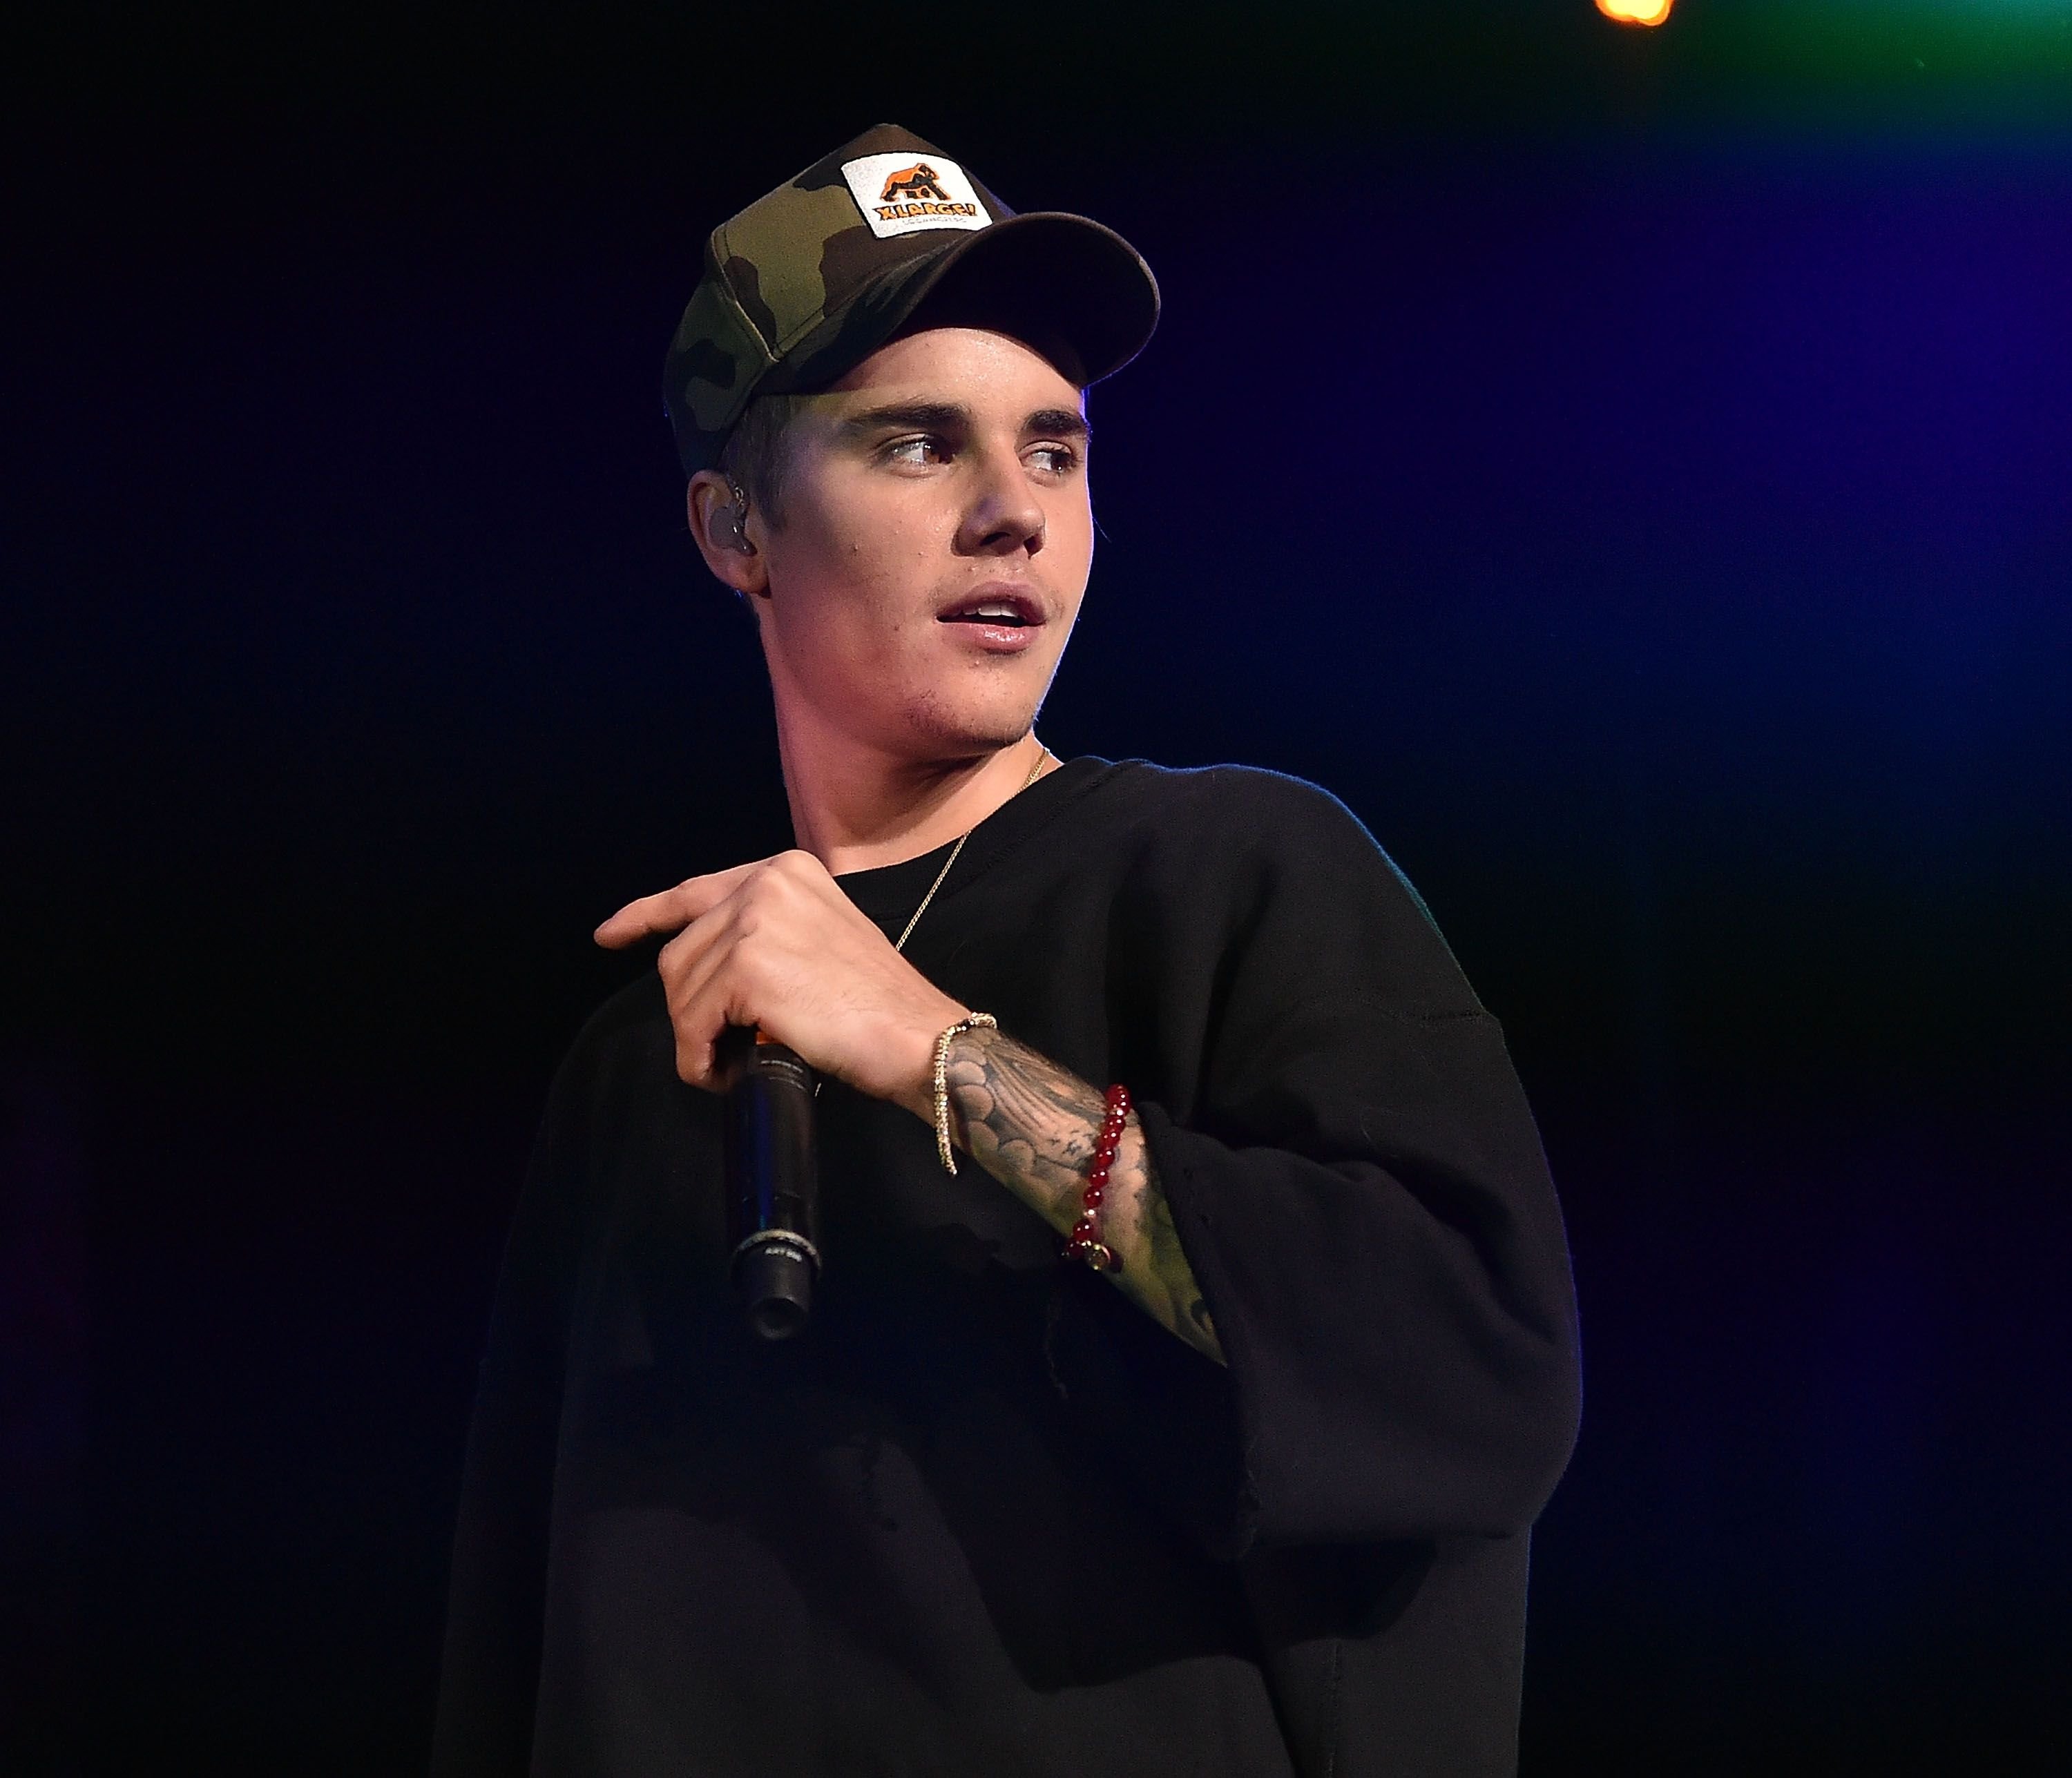 Justin Bieber at Power 96.1's Jingle Ball 2015 at Phillips Arena on December 17, 2015 in Atlanta, Georgia | Photo: Getty Images